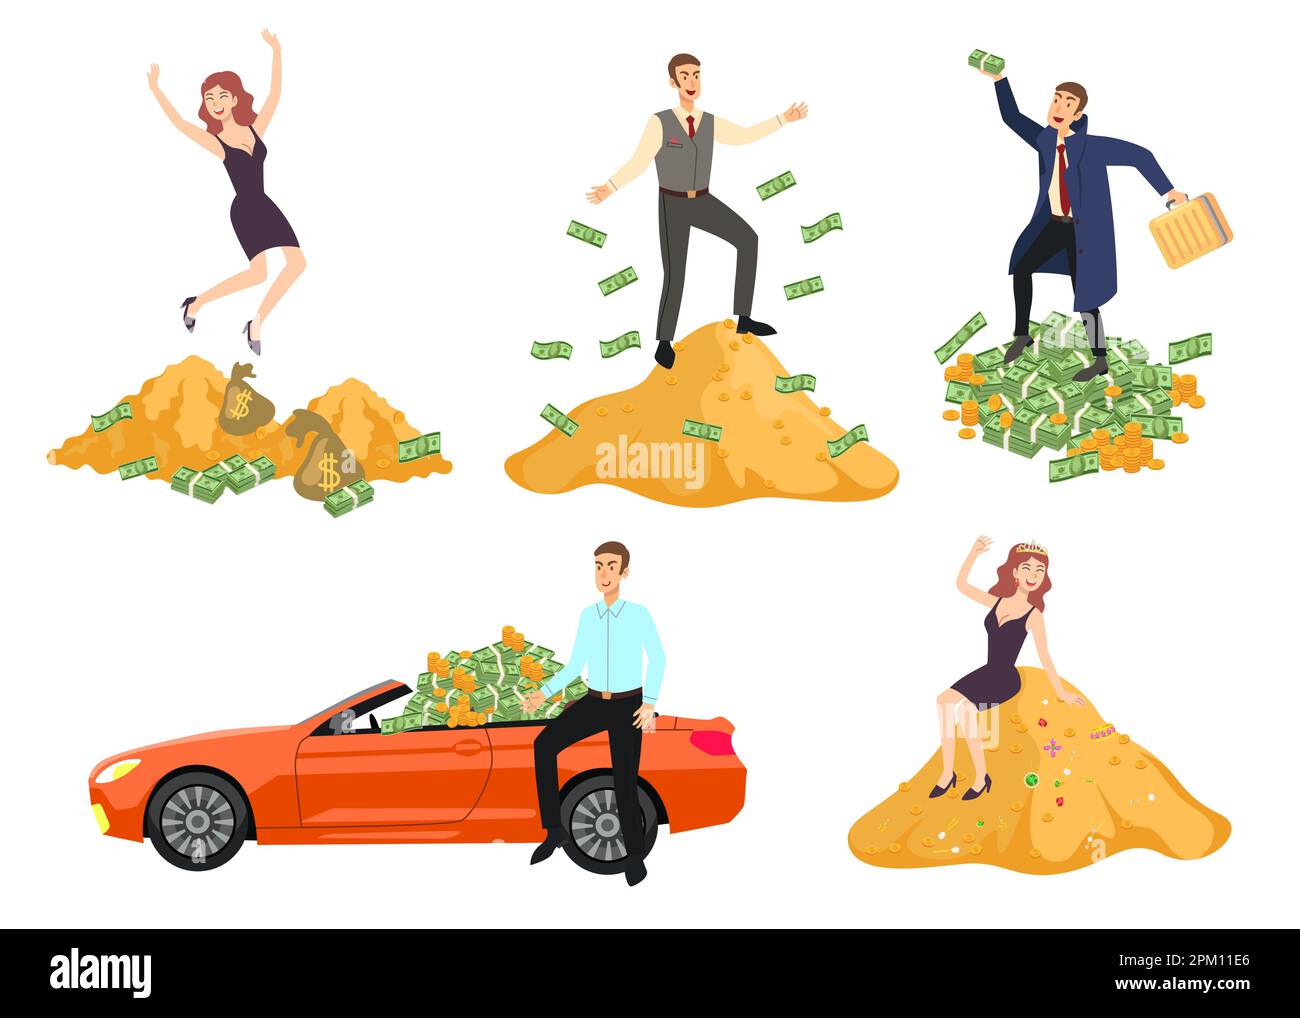 Rich people with mountain of money cartoon illustration set Stock Vector